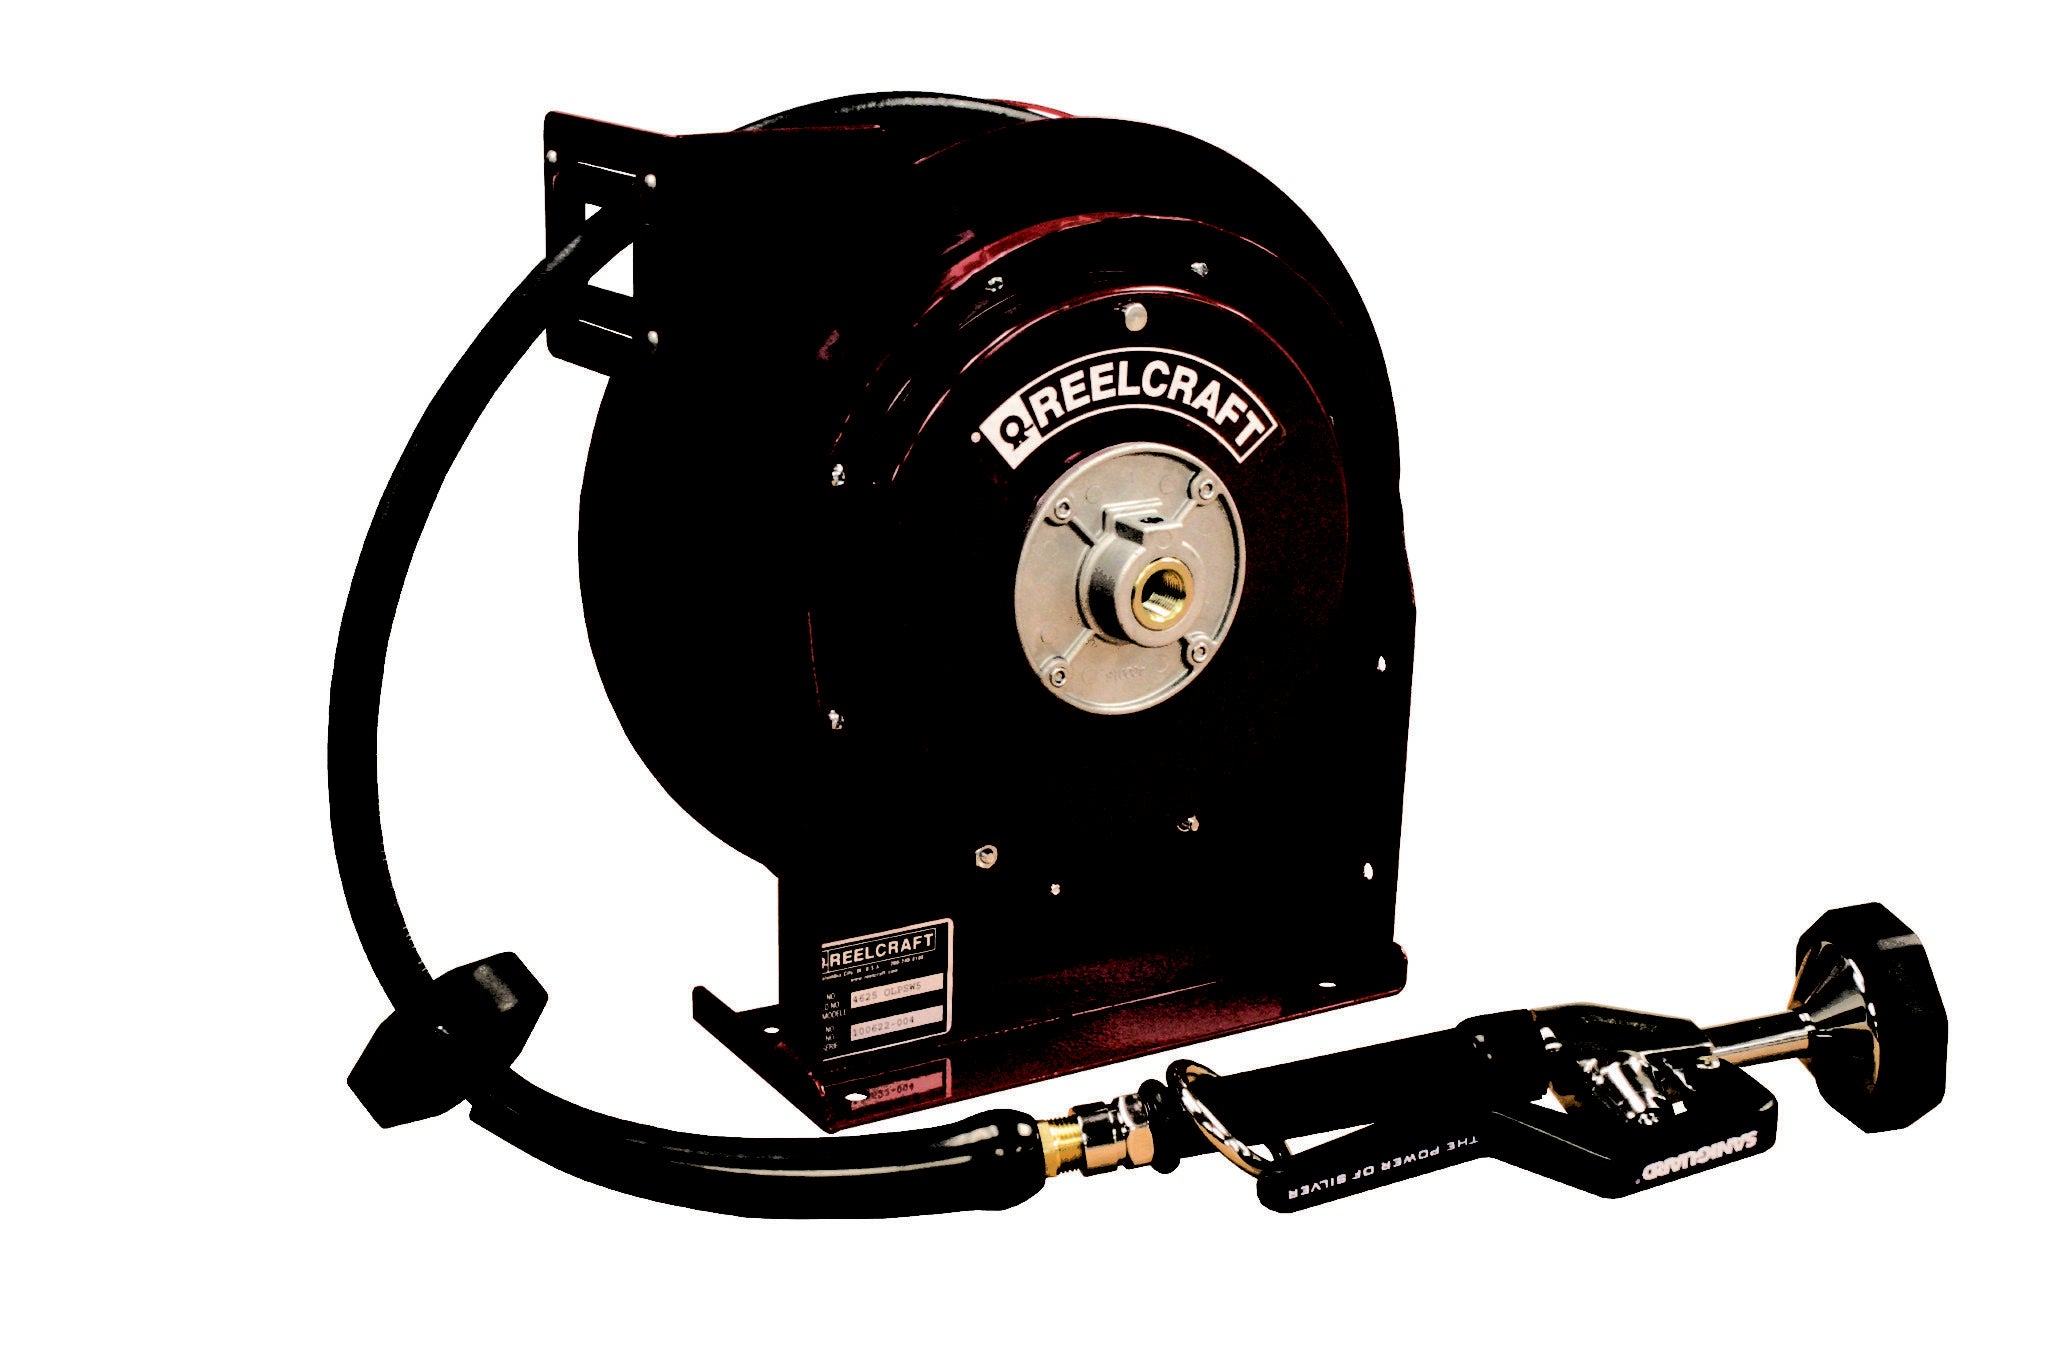 MECLUBE 076-6195-600 - Industrial hose reel in painted steel manual series  fm-601 for water 150°c 1 (without hose)